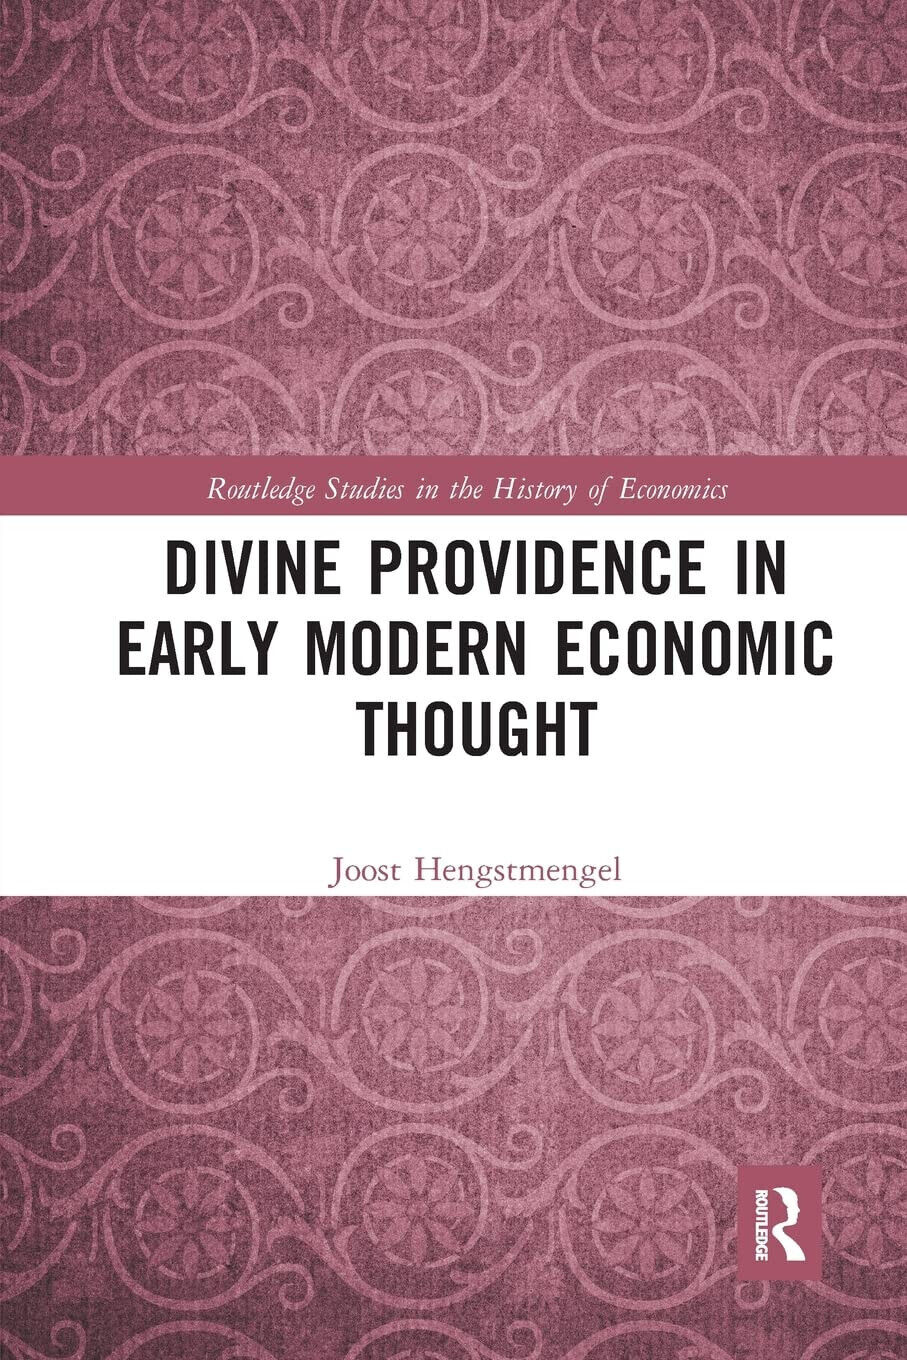 Divine Providence In Early Modern Economic Thought - Joost Hengstmengel - 2020 libro usato